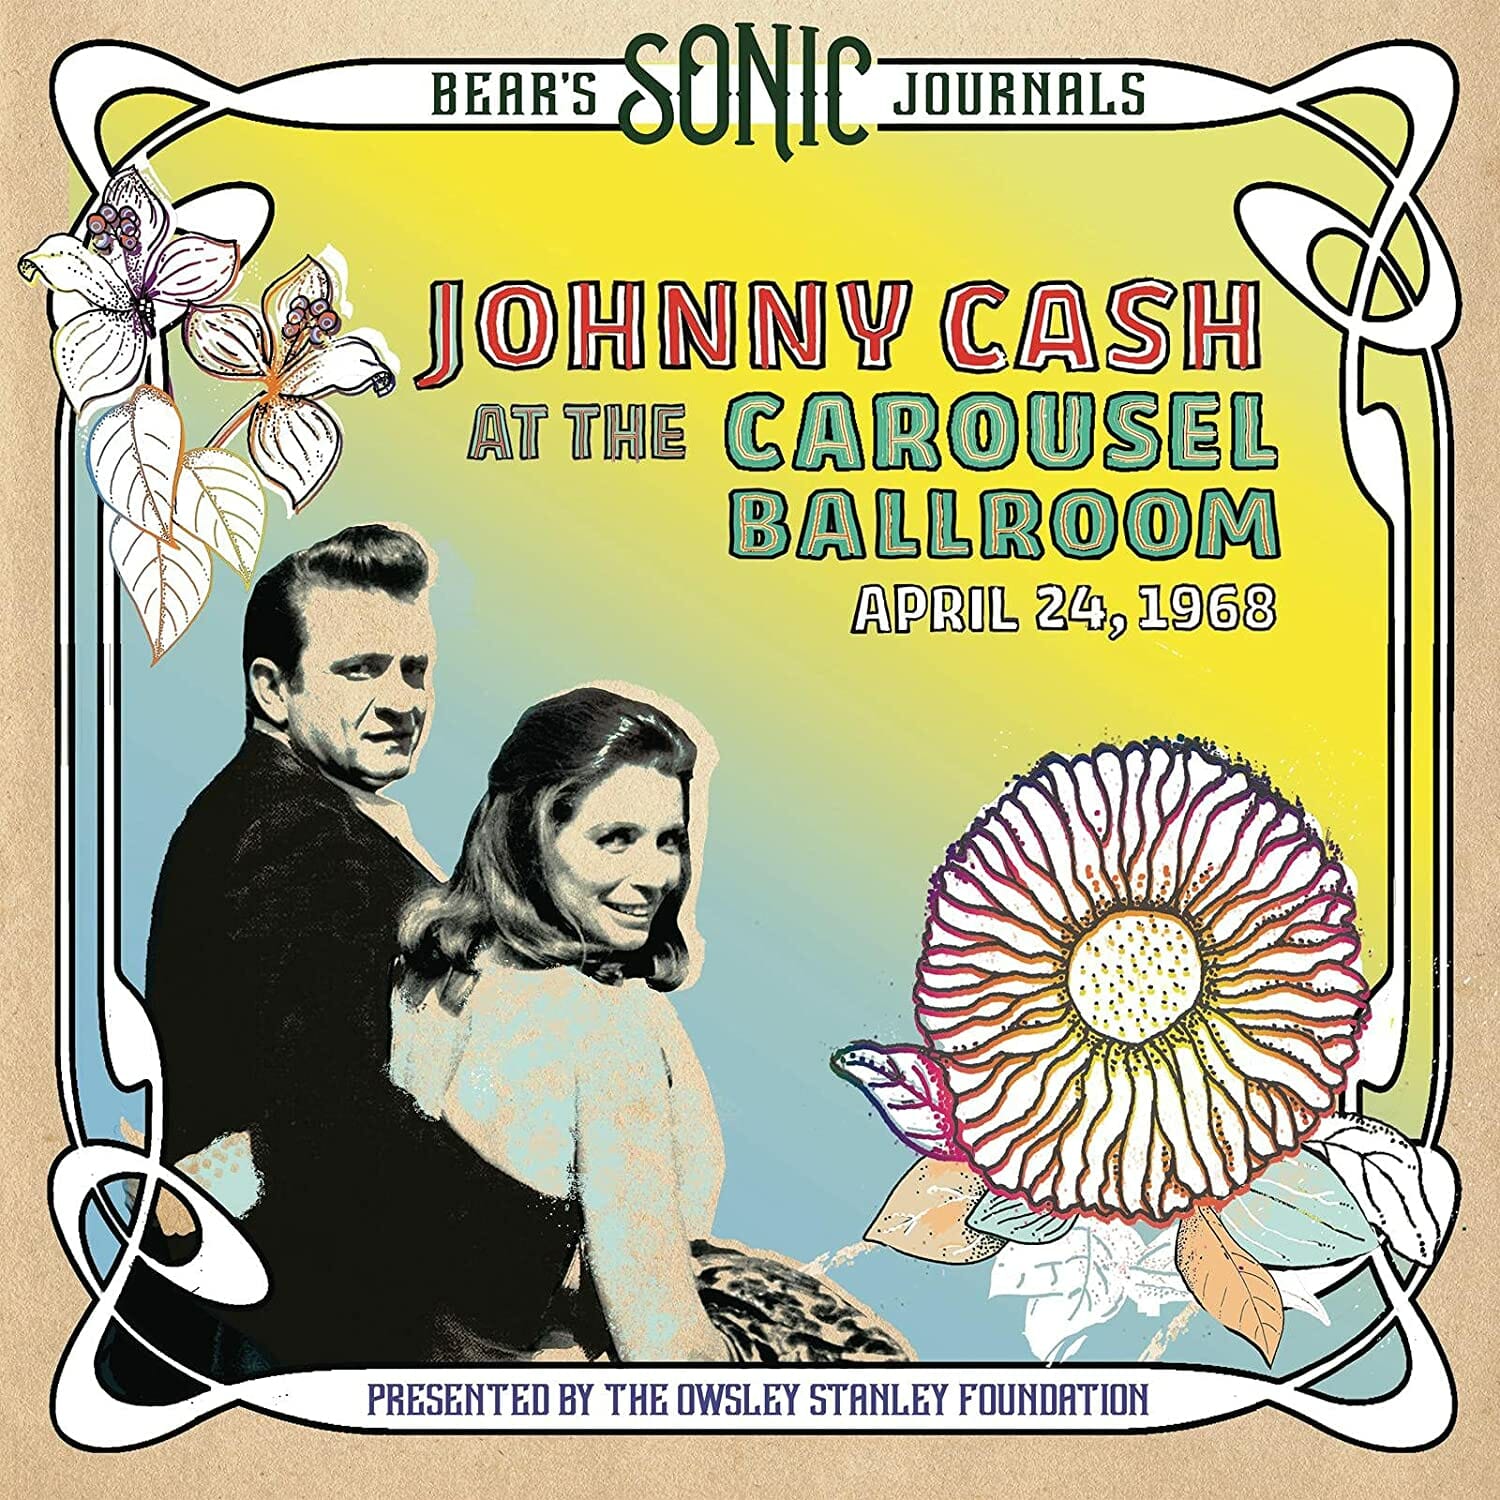 Johnny Cash: Bear’s Sonic Journals: Live at the Carousel Ballroom, April 24, 1968